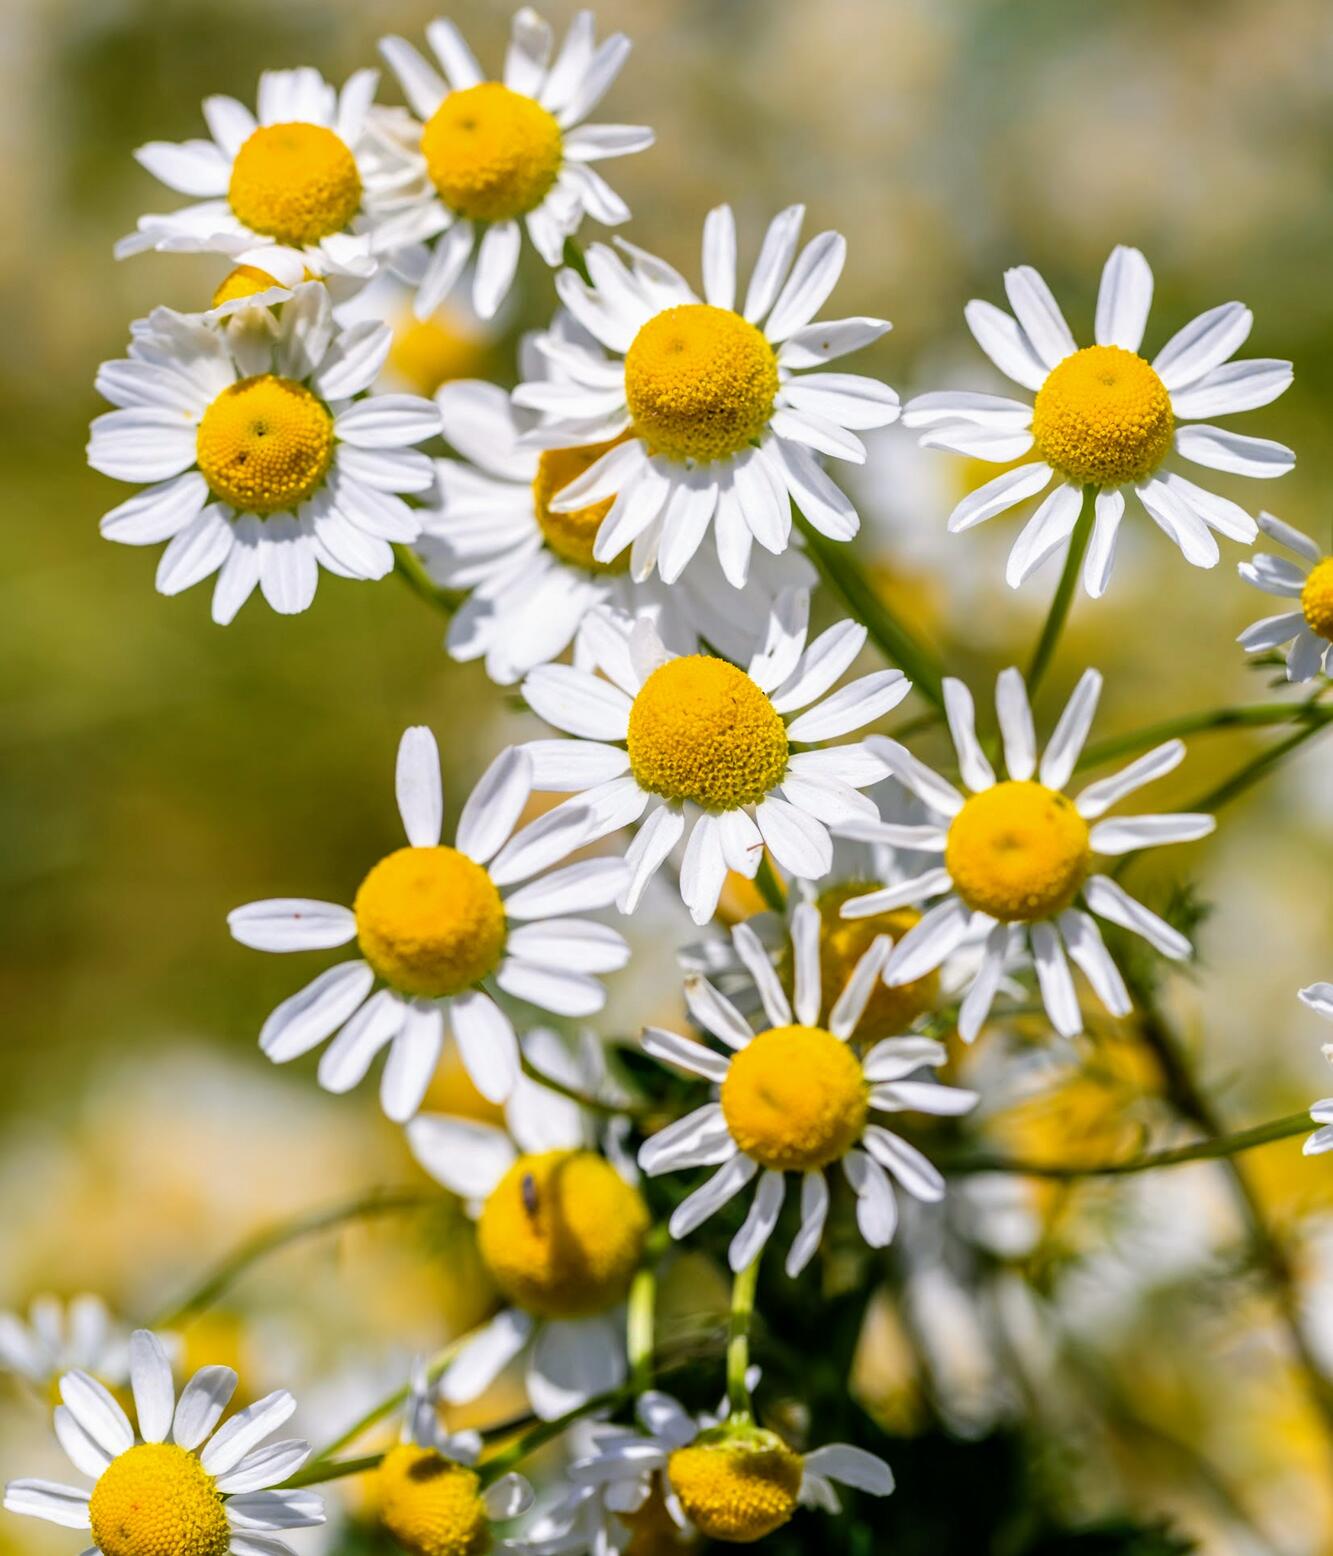 kl_chamomile_active-ingredient_field_plant_2019 -64-